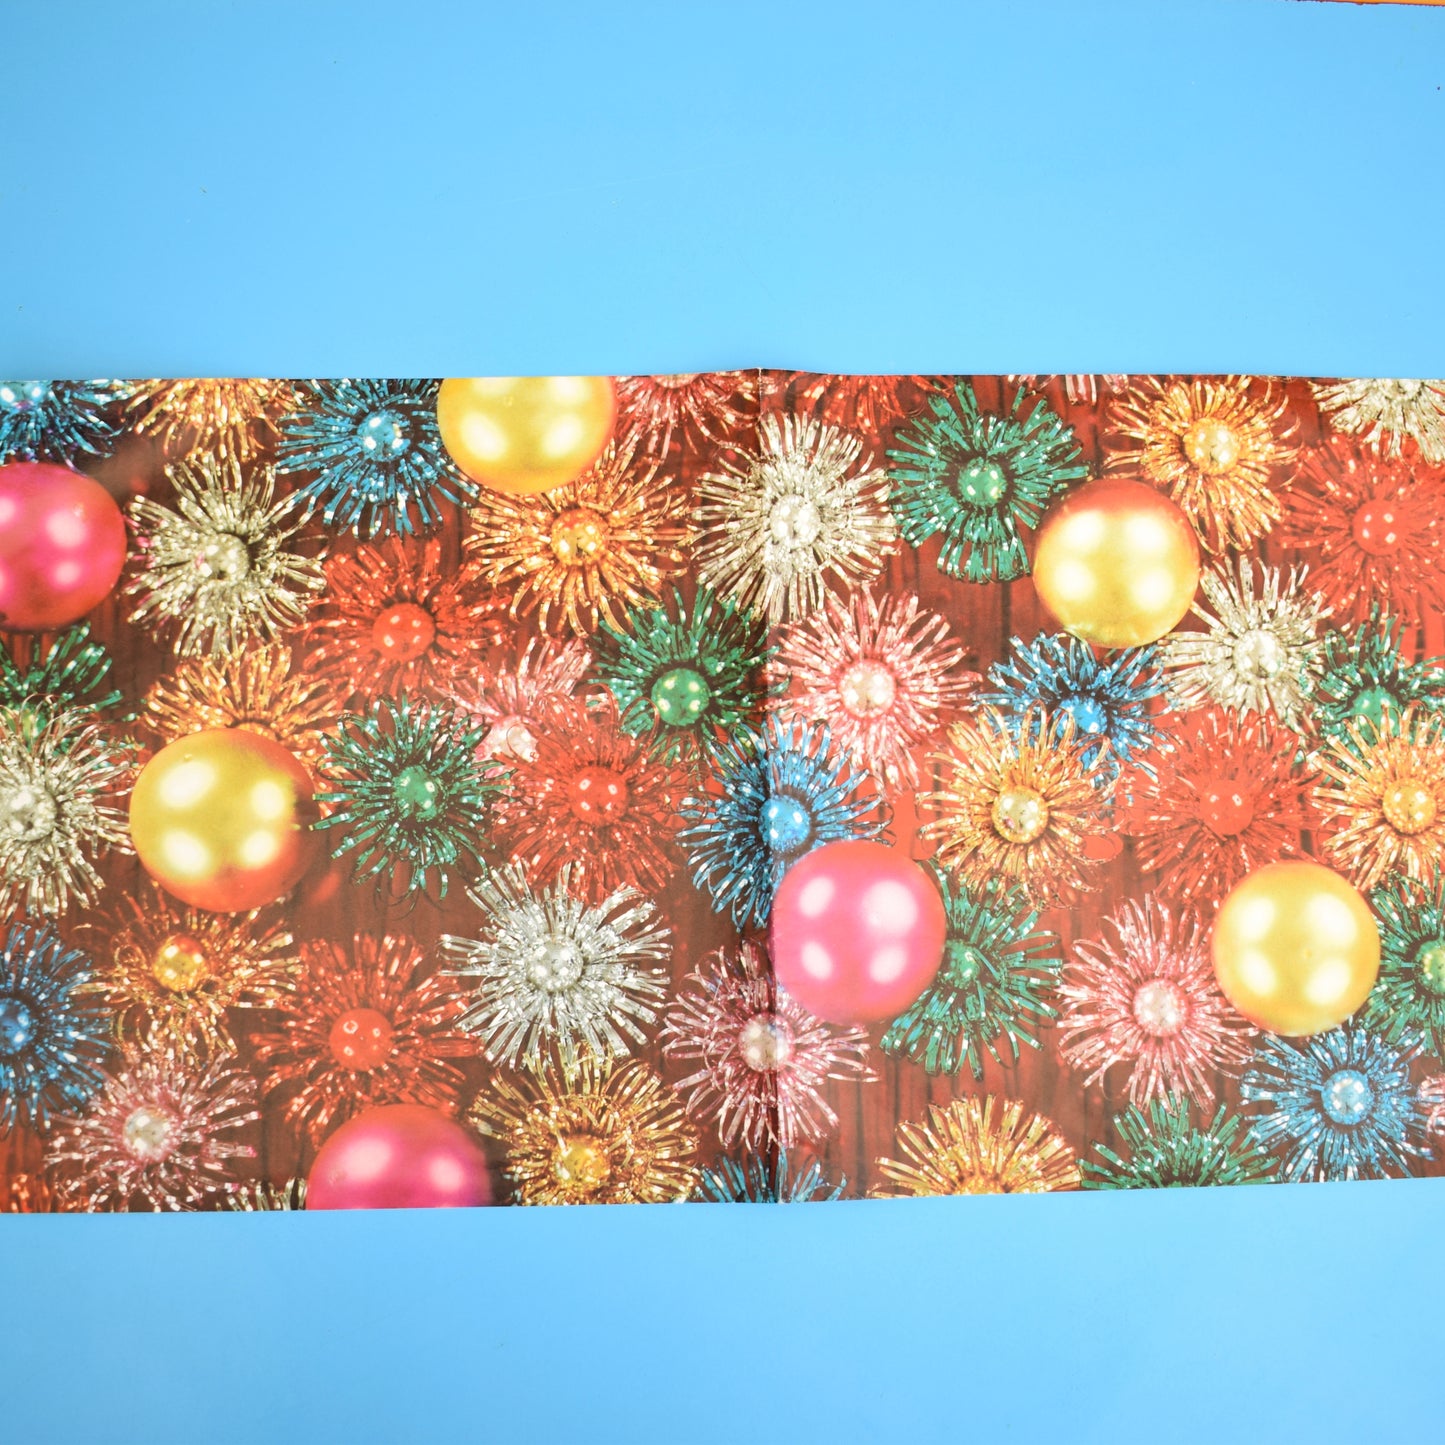 Vintage 1970s Christmas Gift Wrap Paper - Baubles x2